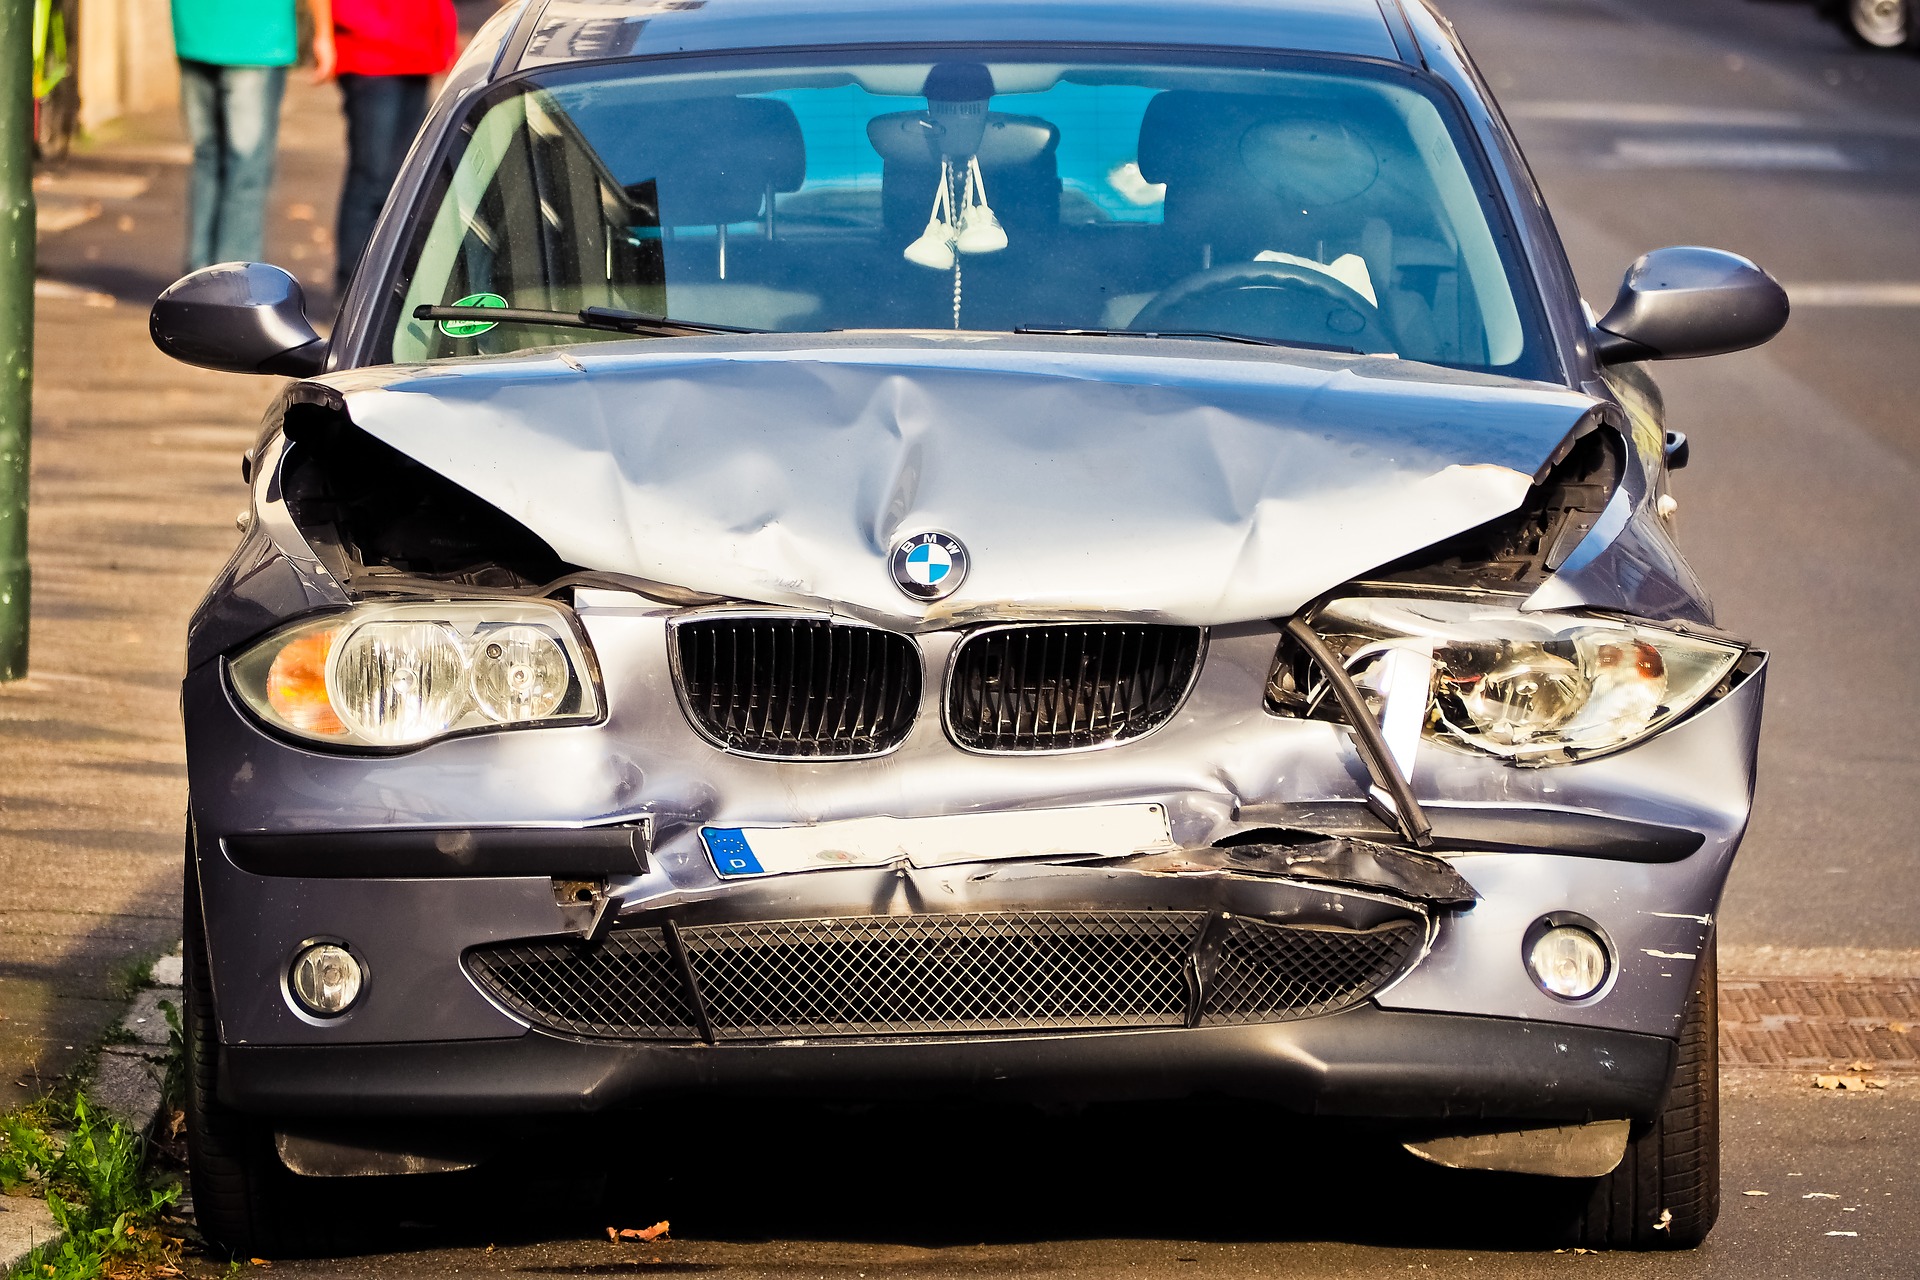 Factors to be Aware of Before You Accept a Quick Settlement After a Car Accident